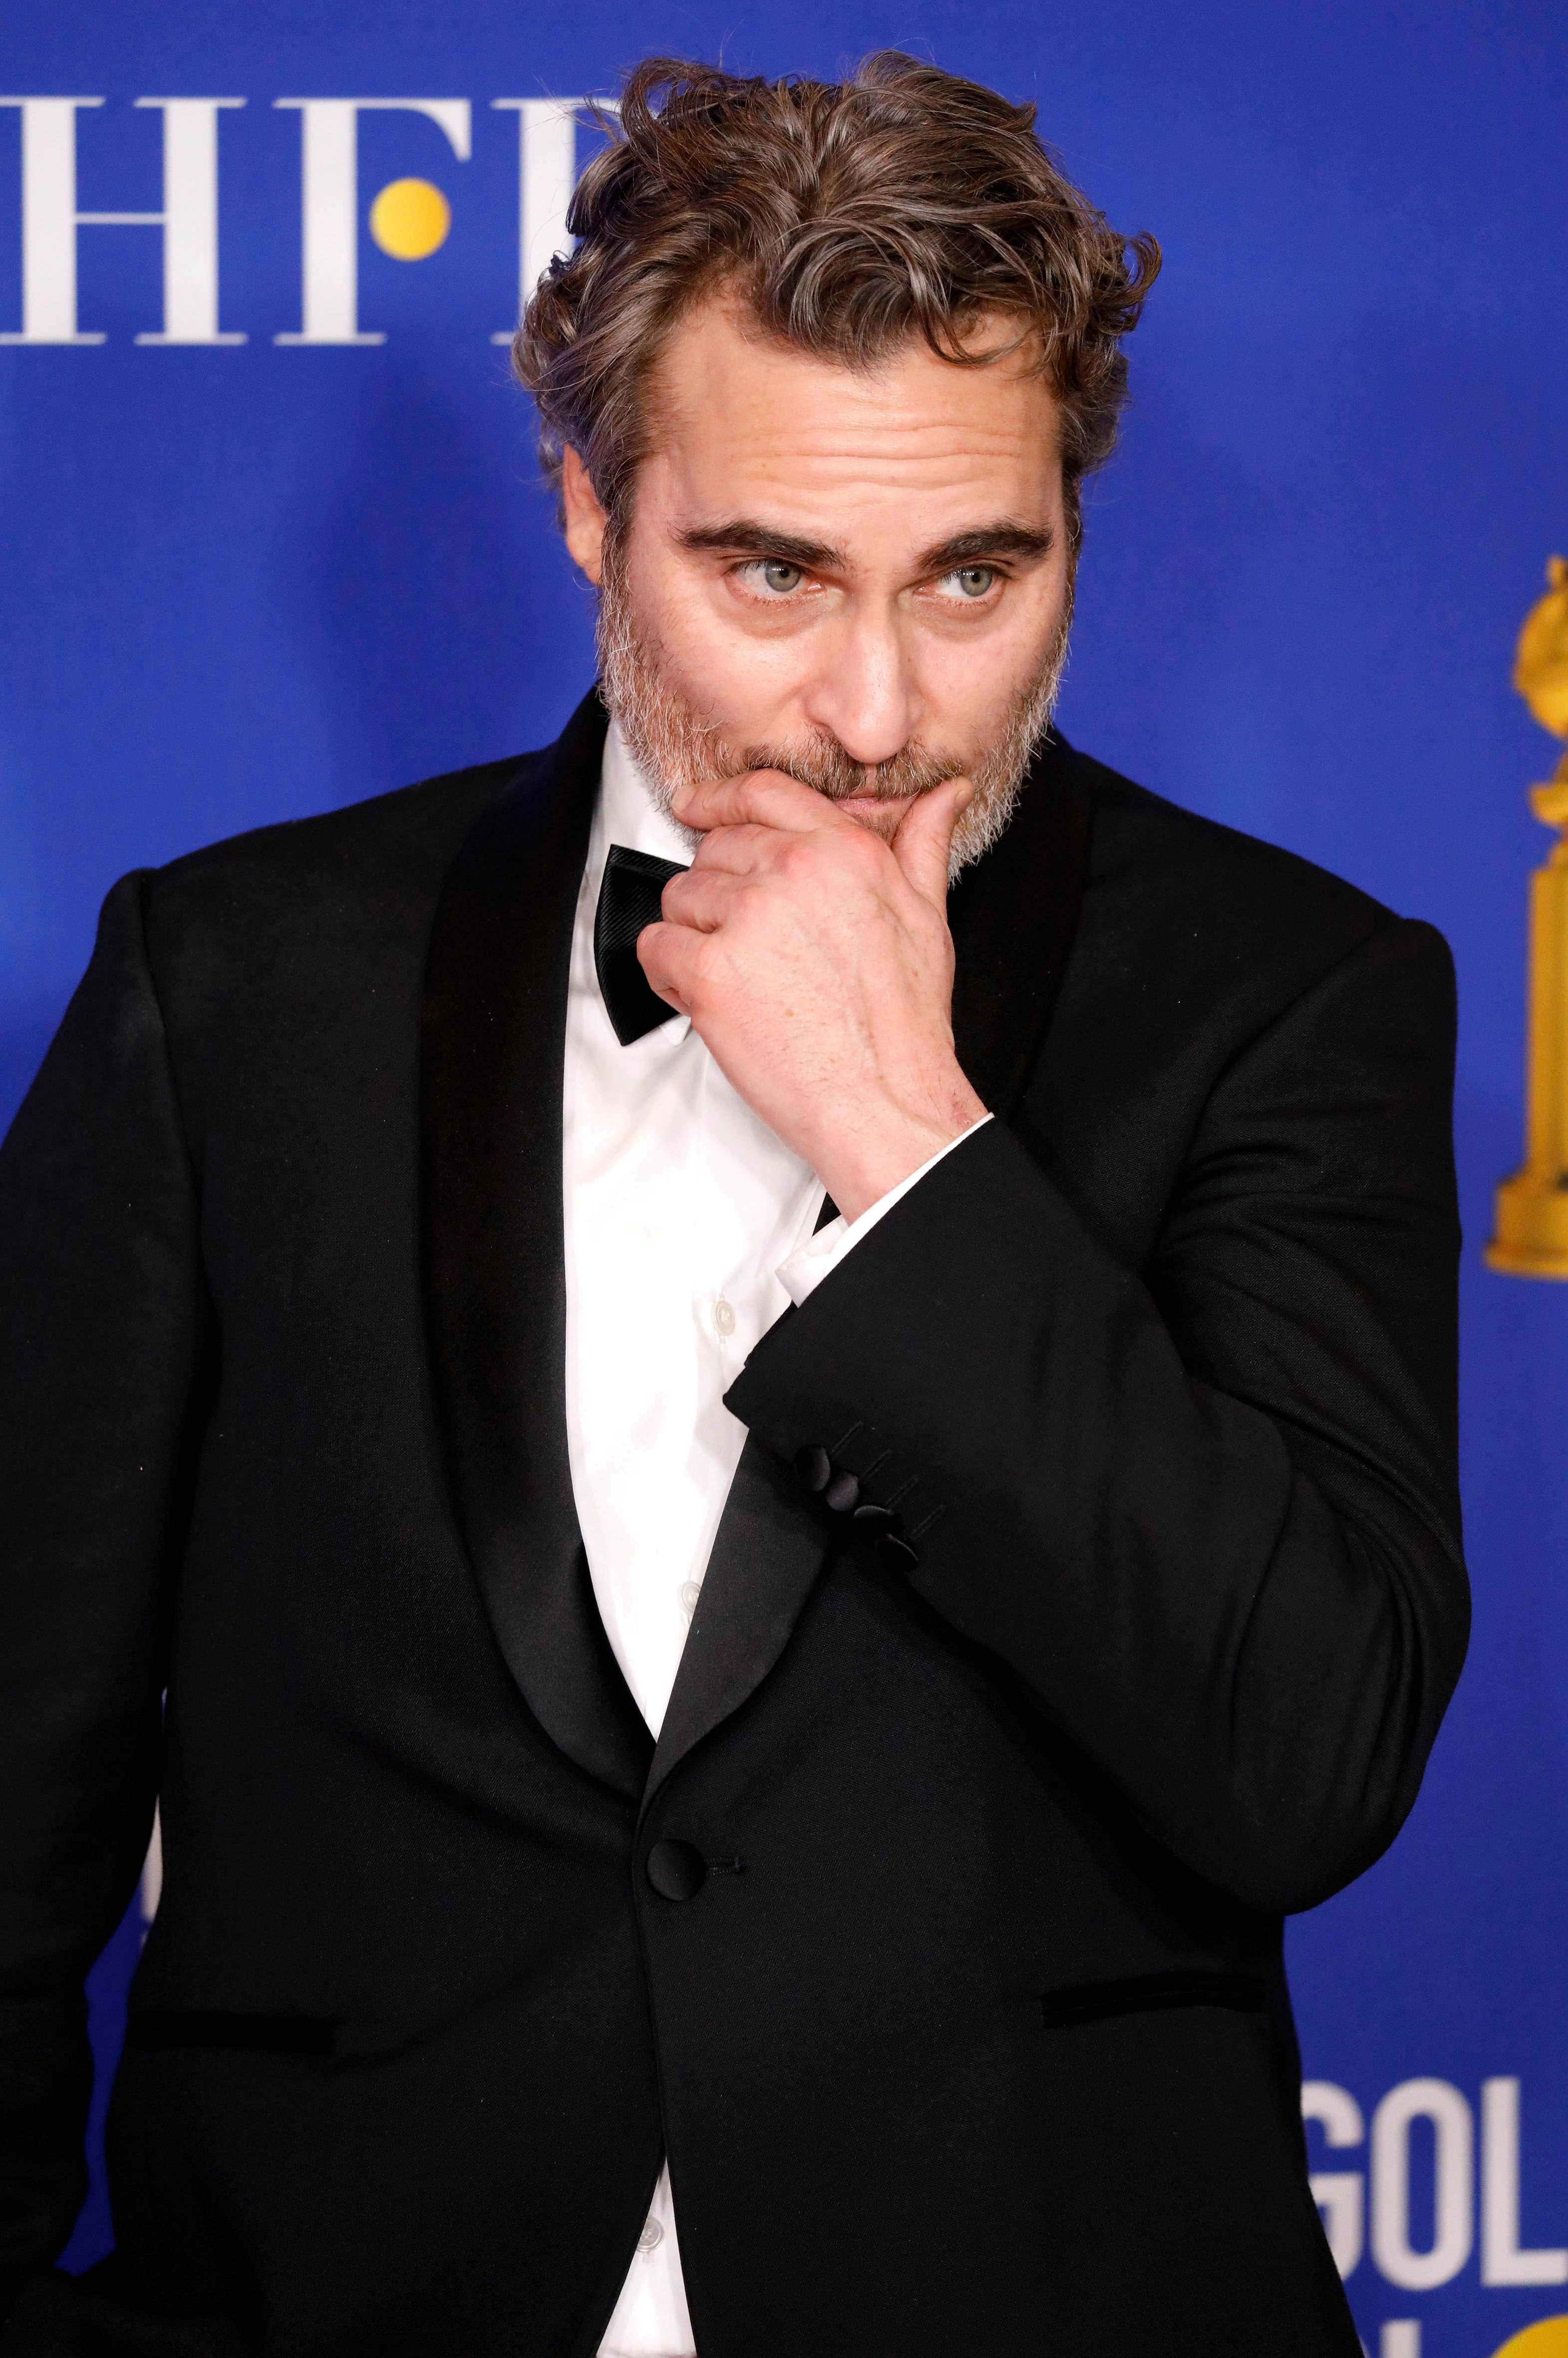 Joaquin Phoenix during the press room for the 77th Annual Golden Globe Awards at the Beverly Hilton Hotel on January 05, 2020 in Beverly Hills, California.  |  Source: Getty Images